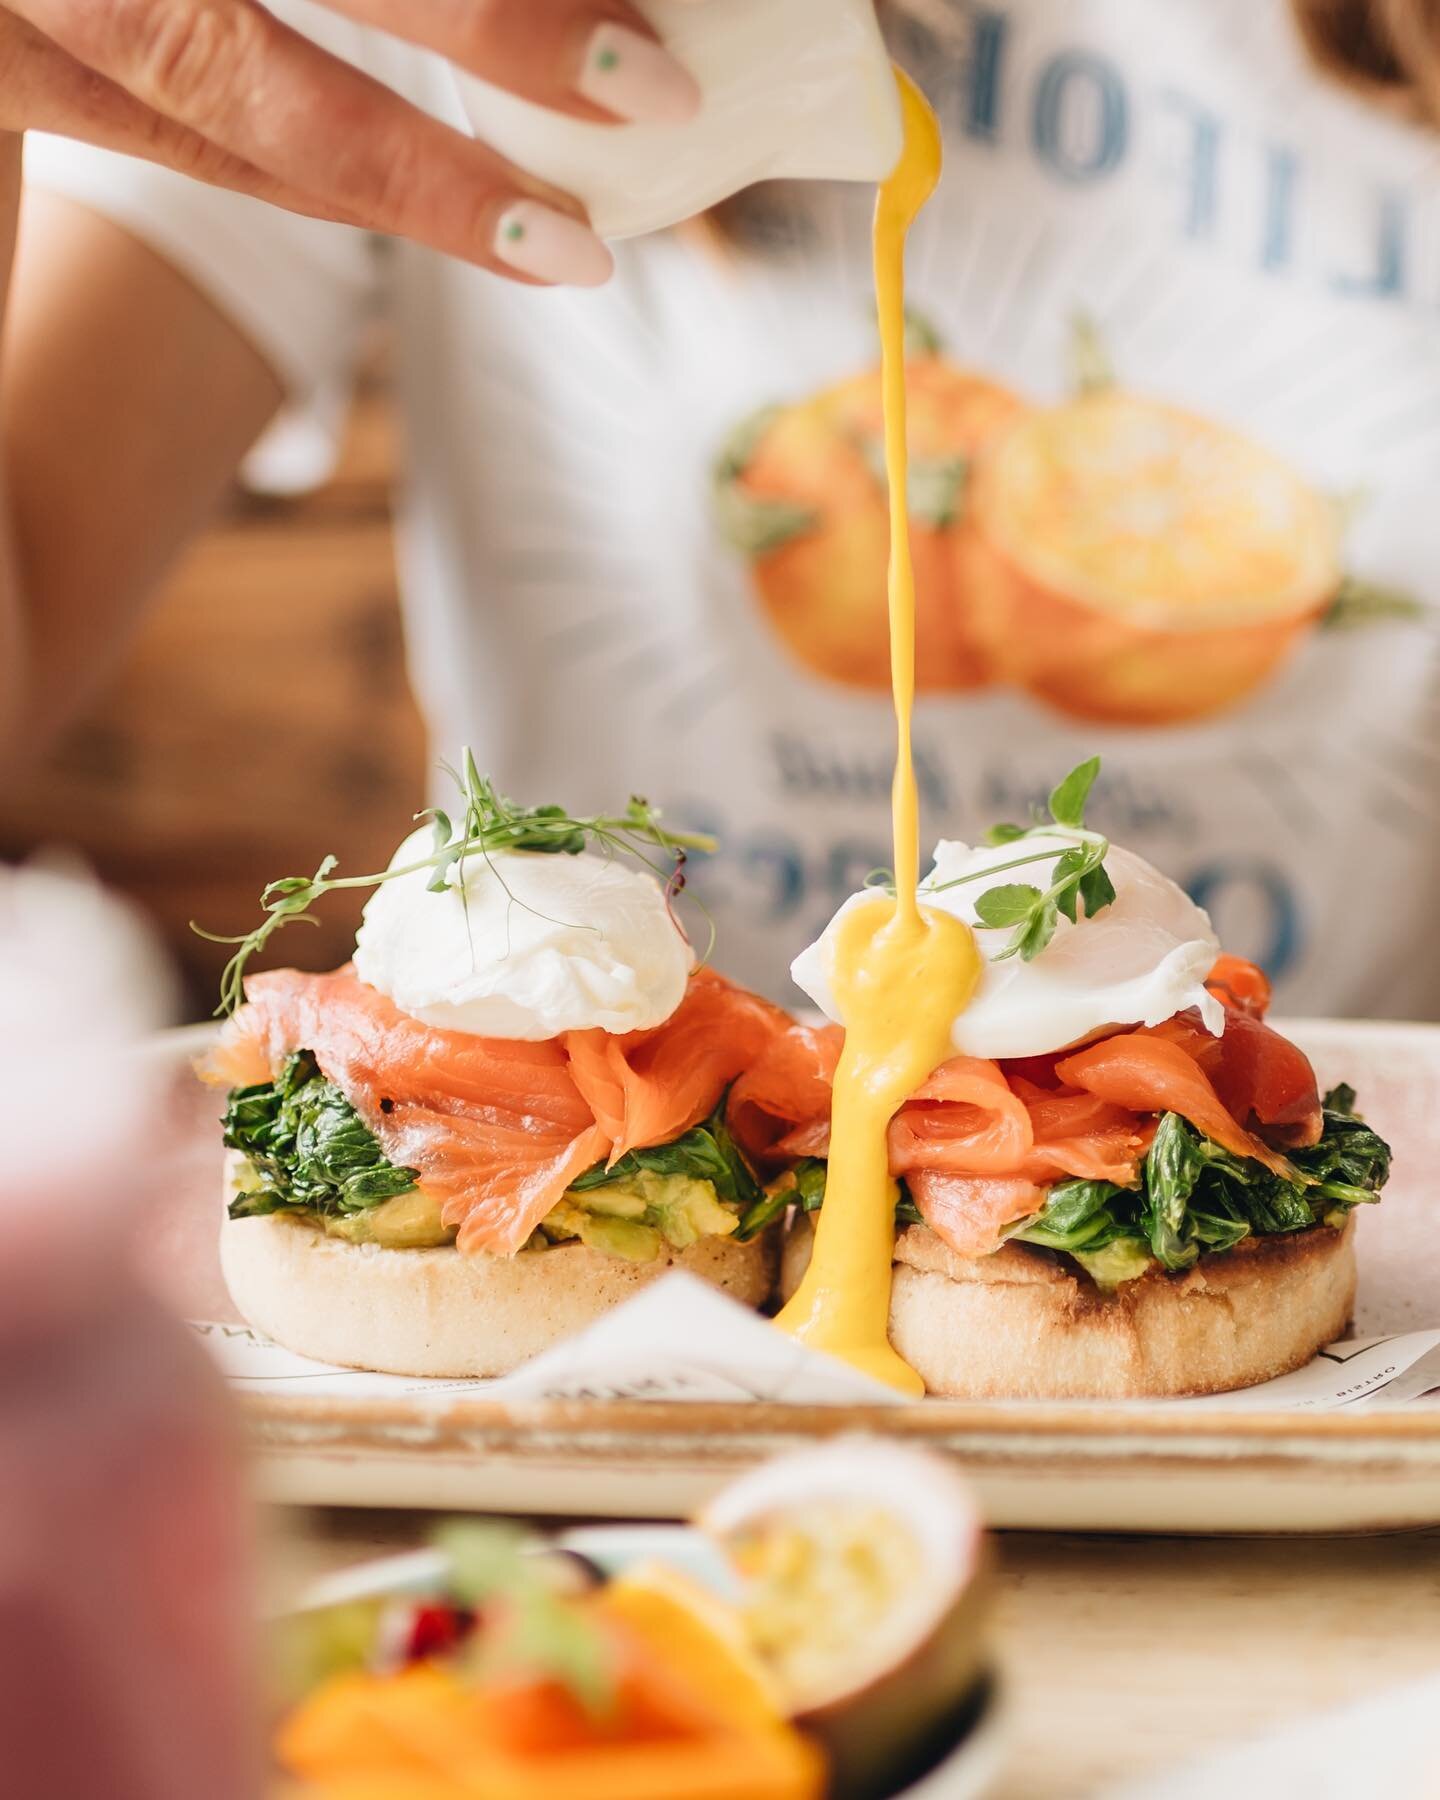 Smoked salmon, fresh hens eggs, wilted greens and avocado on @welbeckbakehouse English muffins with homemade hollandaise sauce 🍳🥑